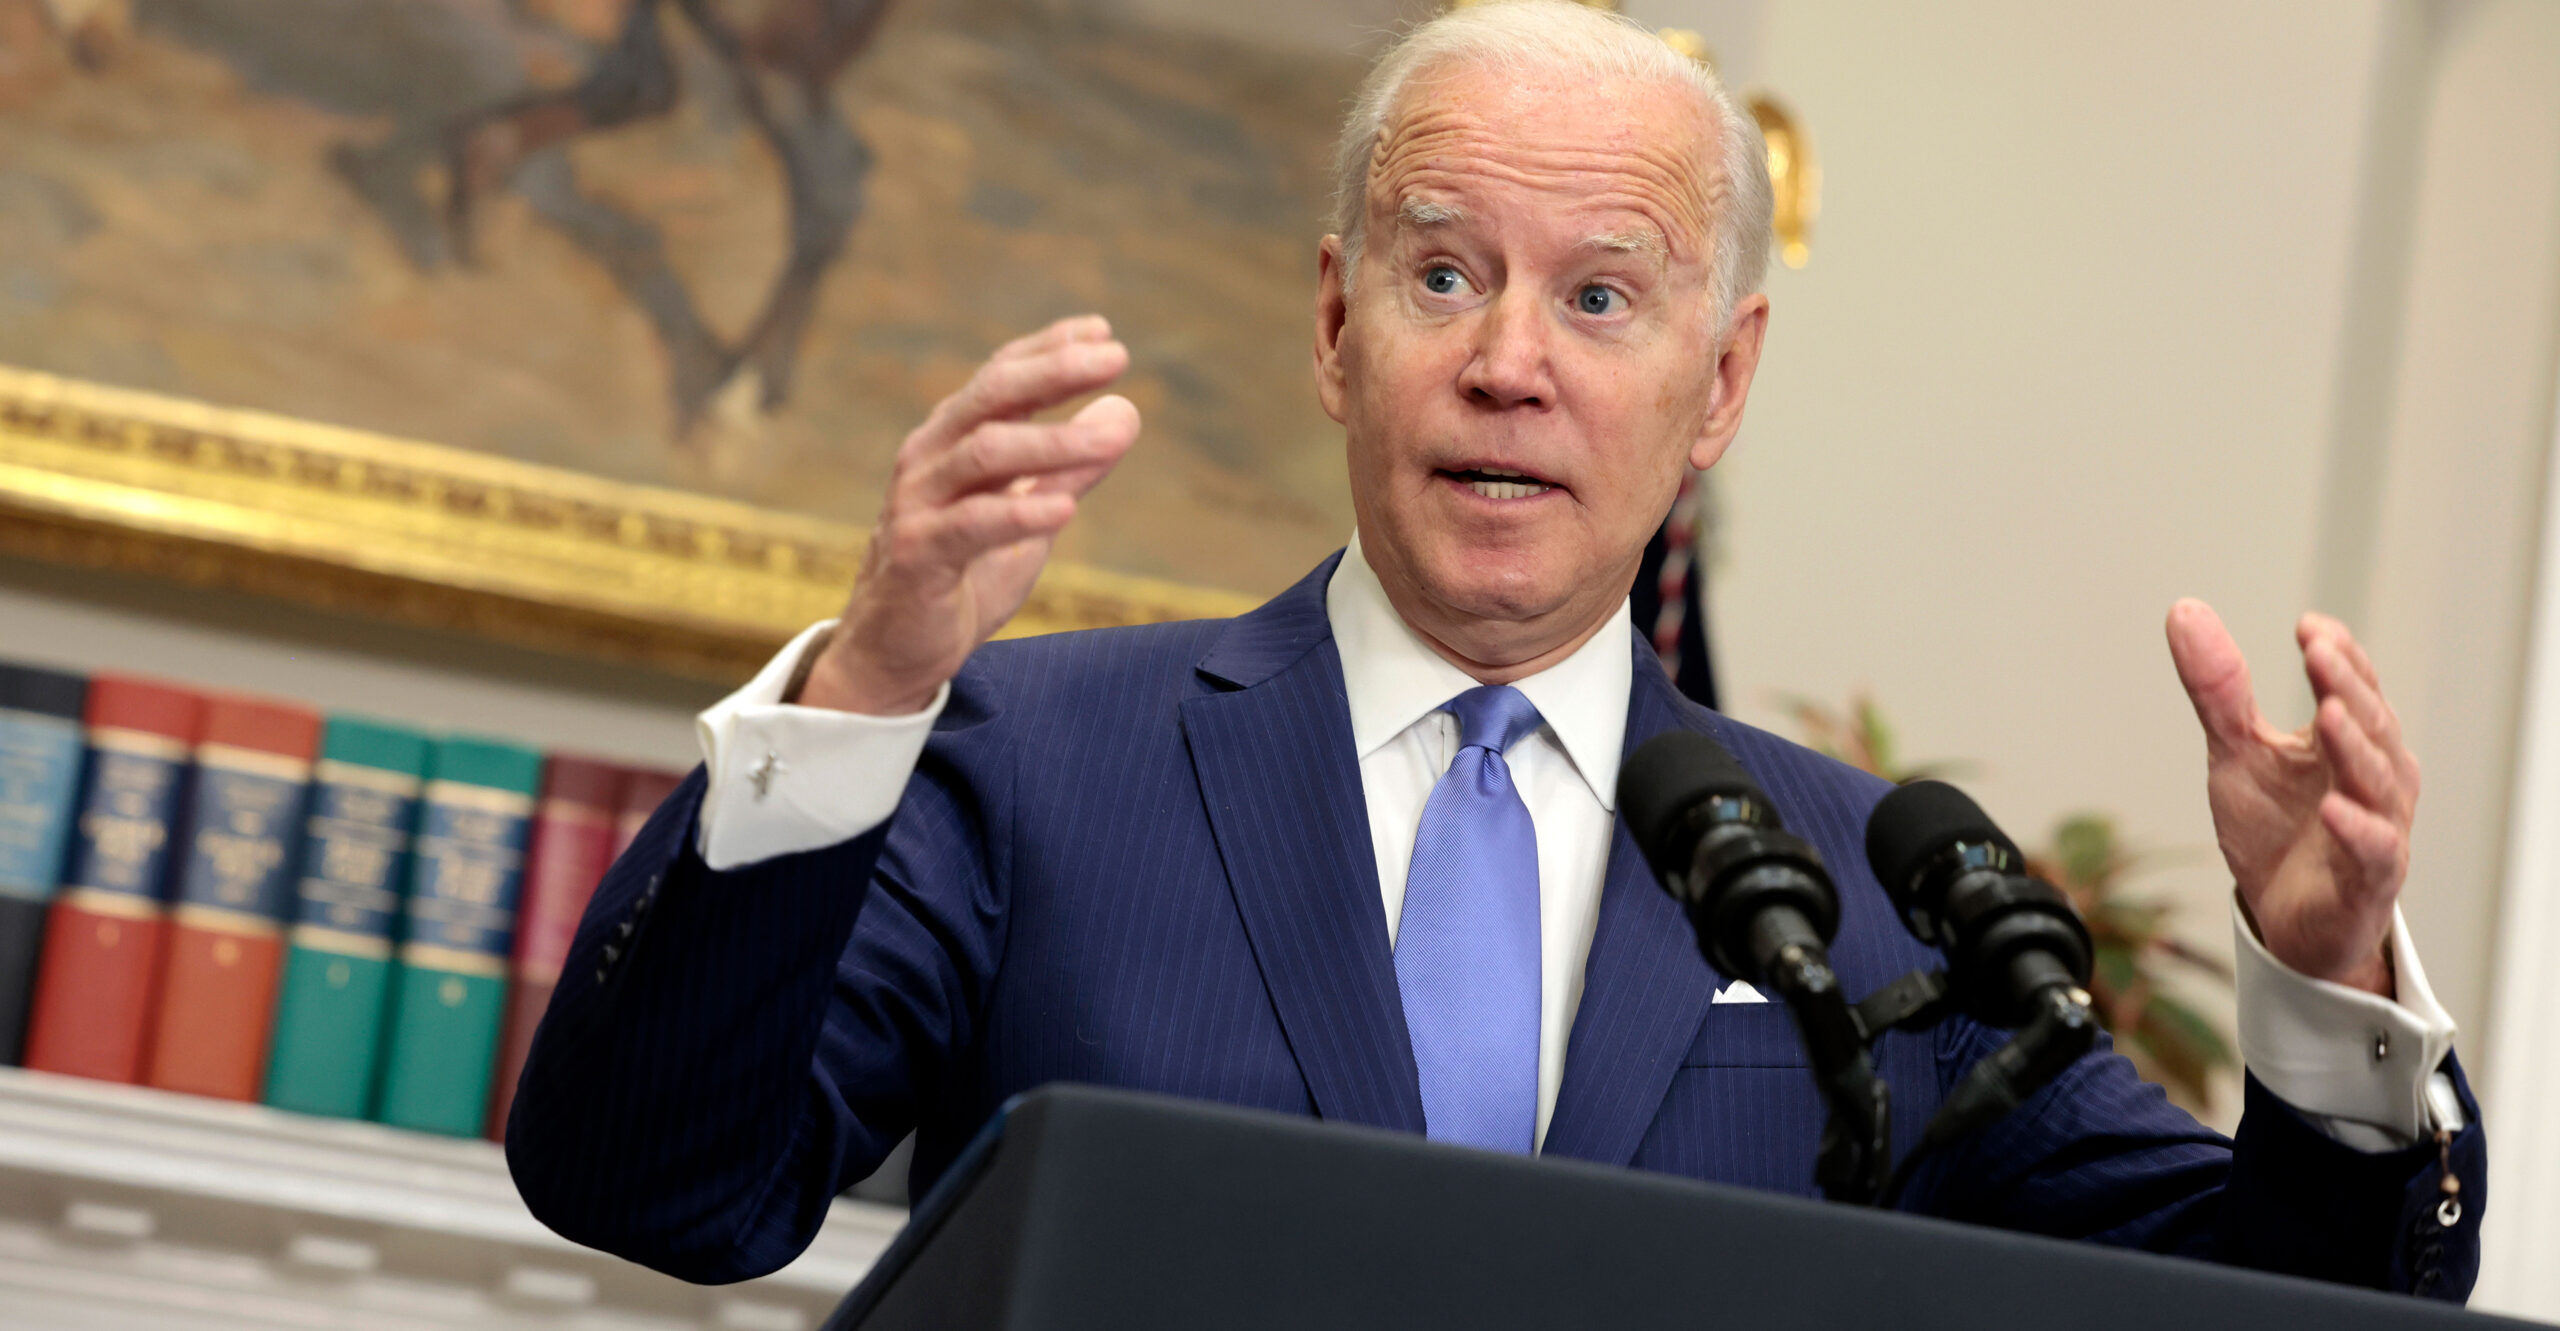 ‘Fact-Checkers’ Bored by Biden’s Outbursts